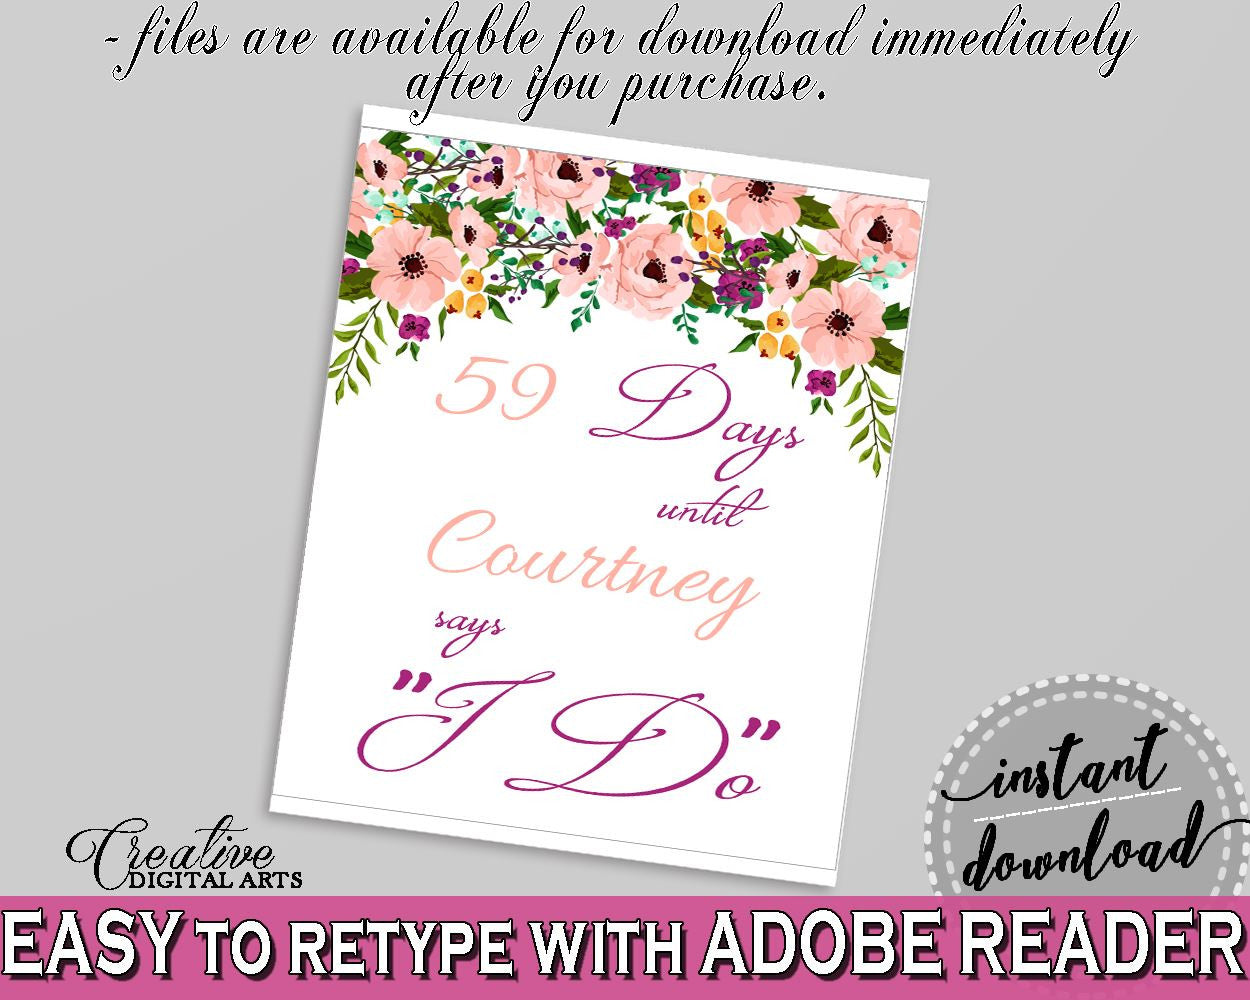 Days Until I Do in Watercolor Flowers Bridal Shower White And Pink Theme, days until i do sign, modern calligraphy, shower activity - 9GOY4 - Digital Product